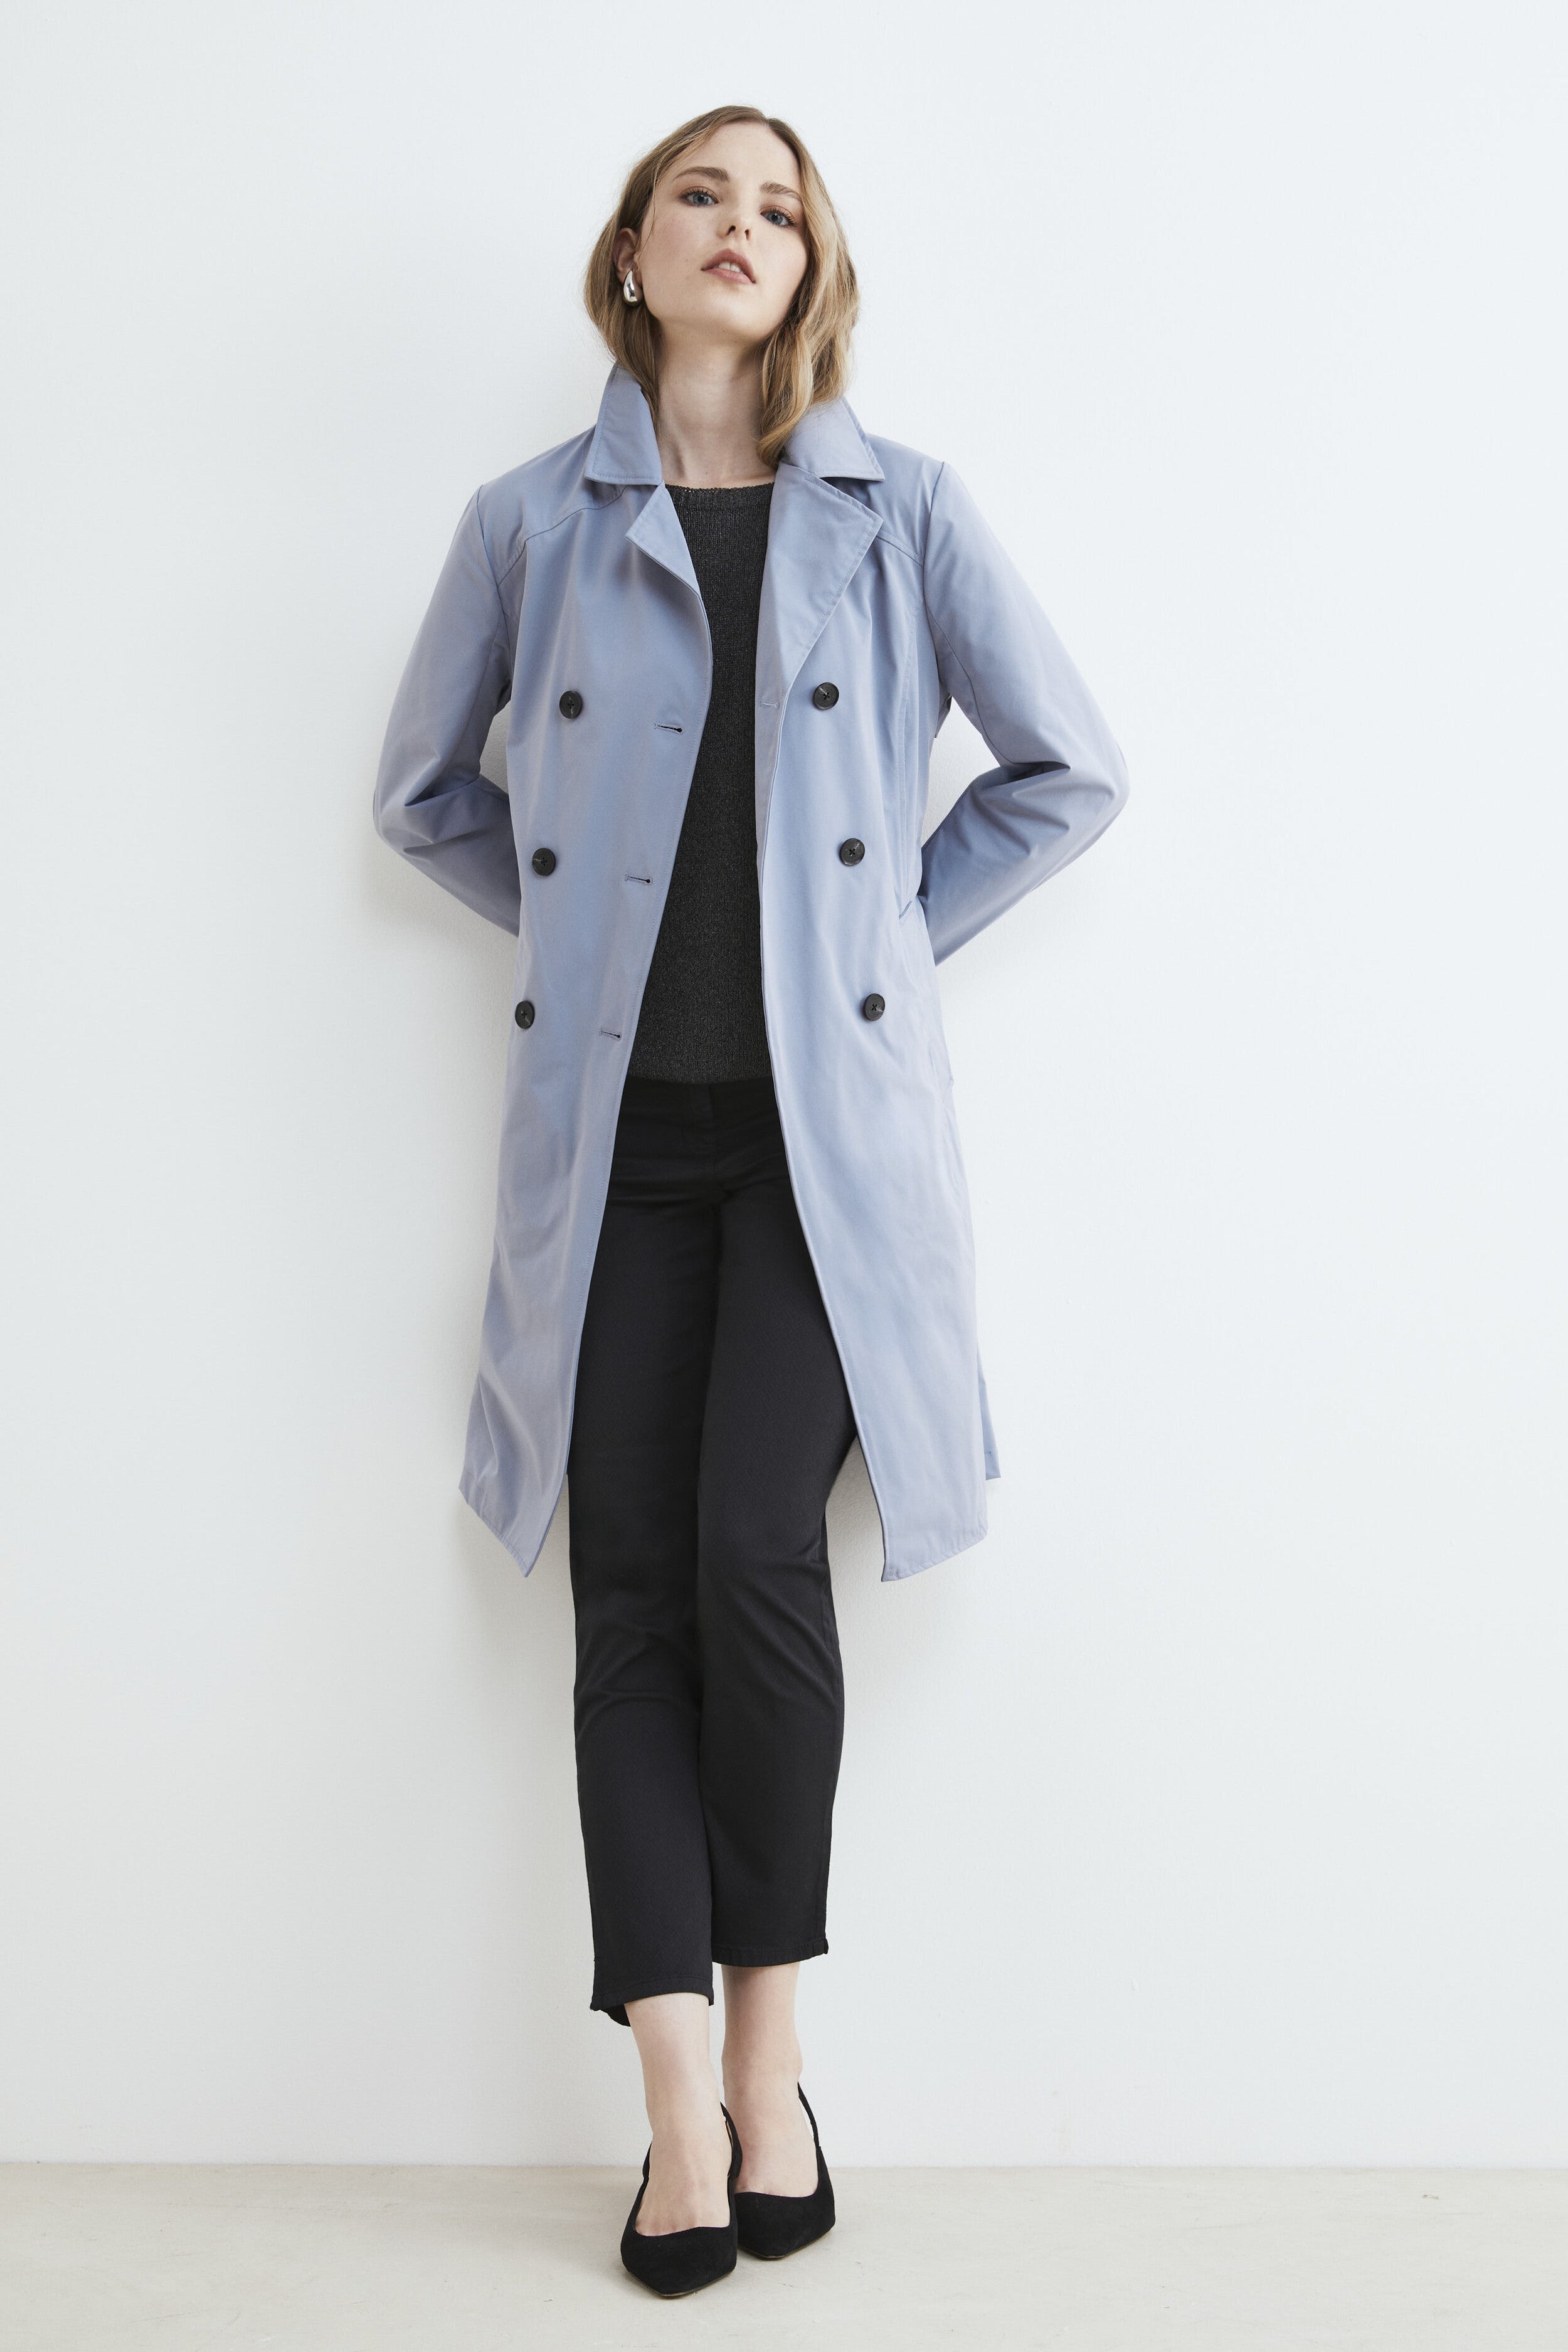 Women’s double-breasted trench coat - Dust grey